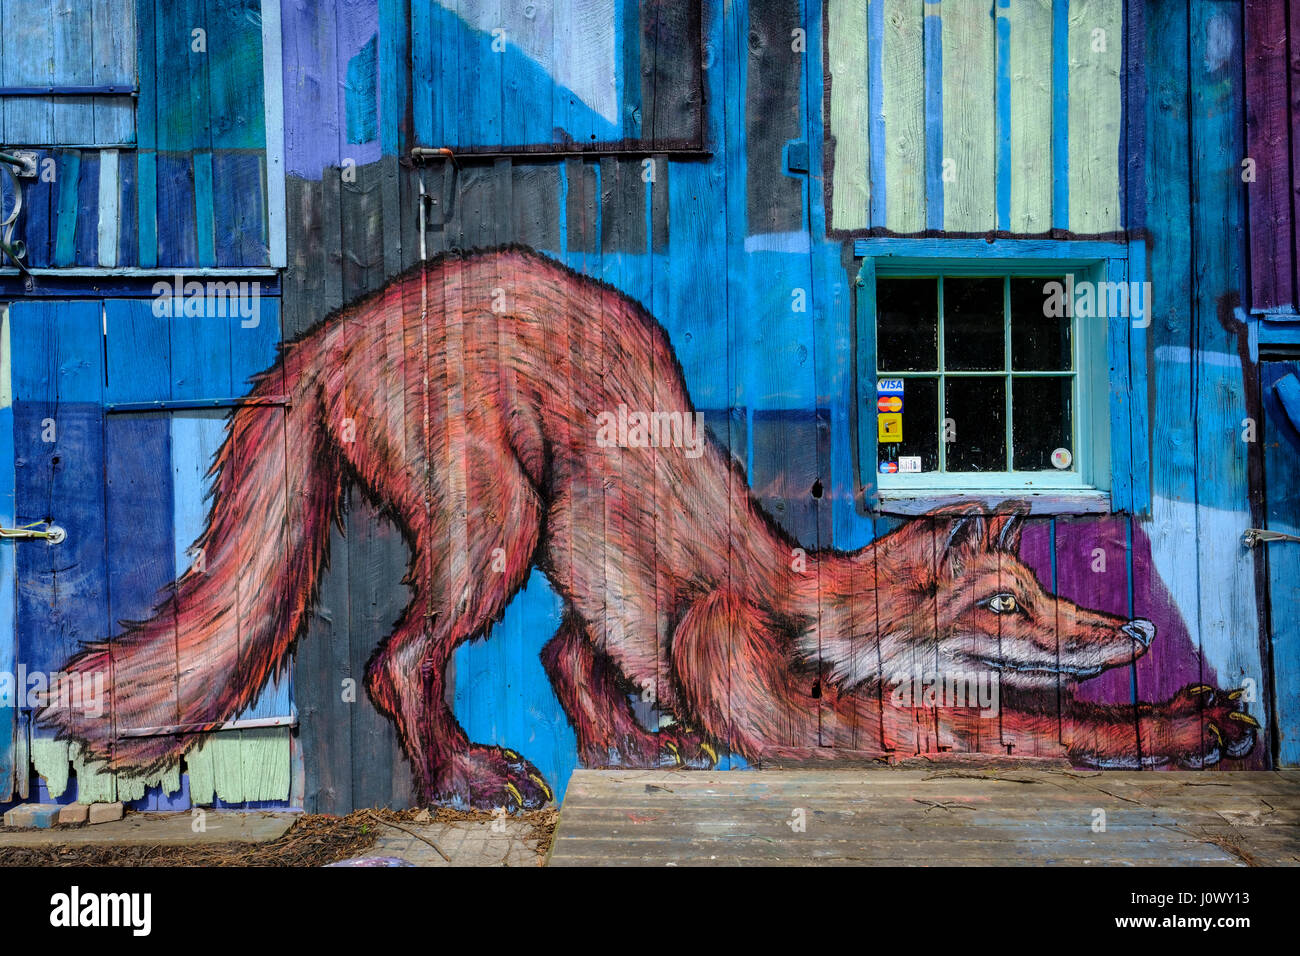 Graffiti art image of a fox painted on a barn wall in the Village of Bayfield, Ontario, Canada. Stock Photo